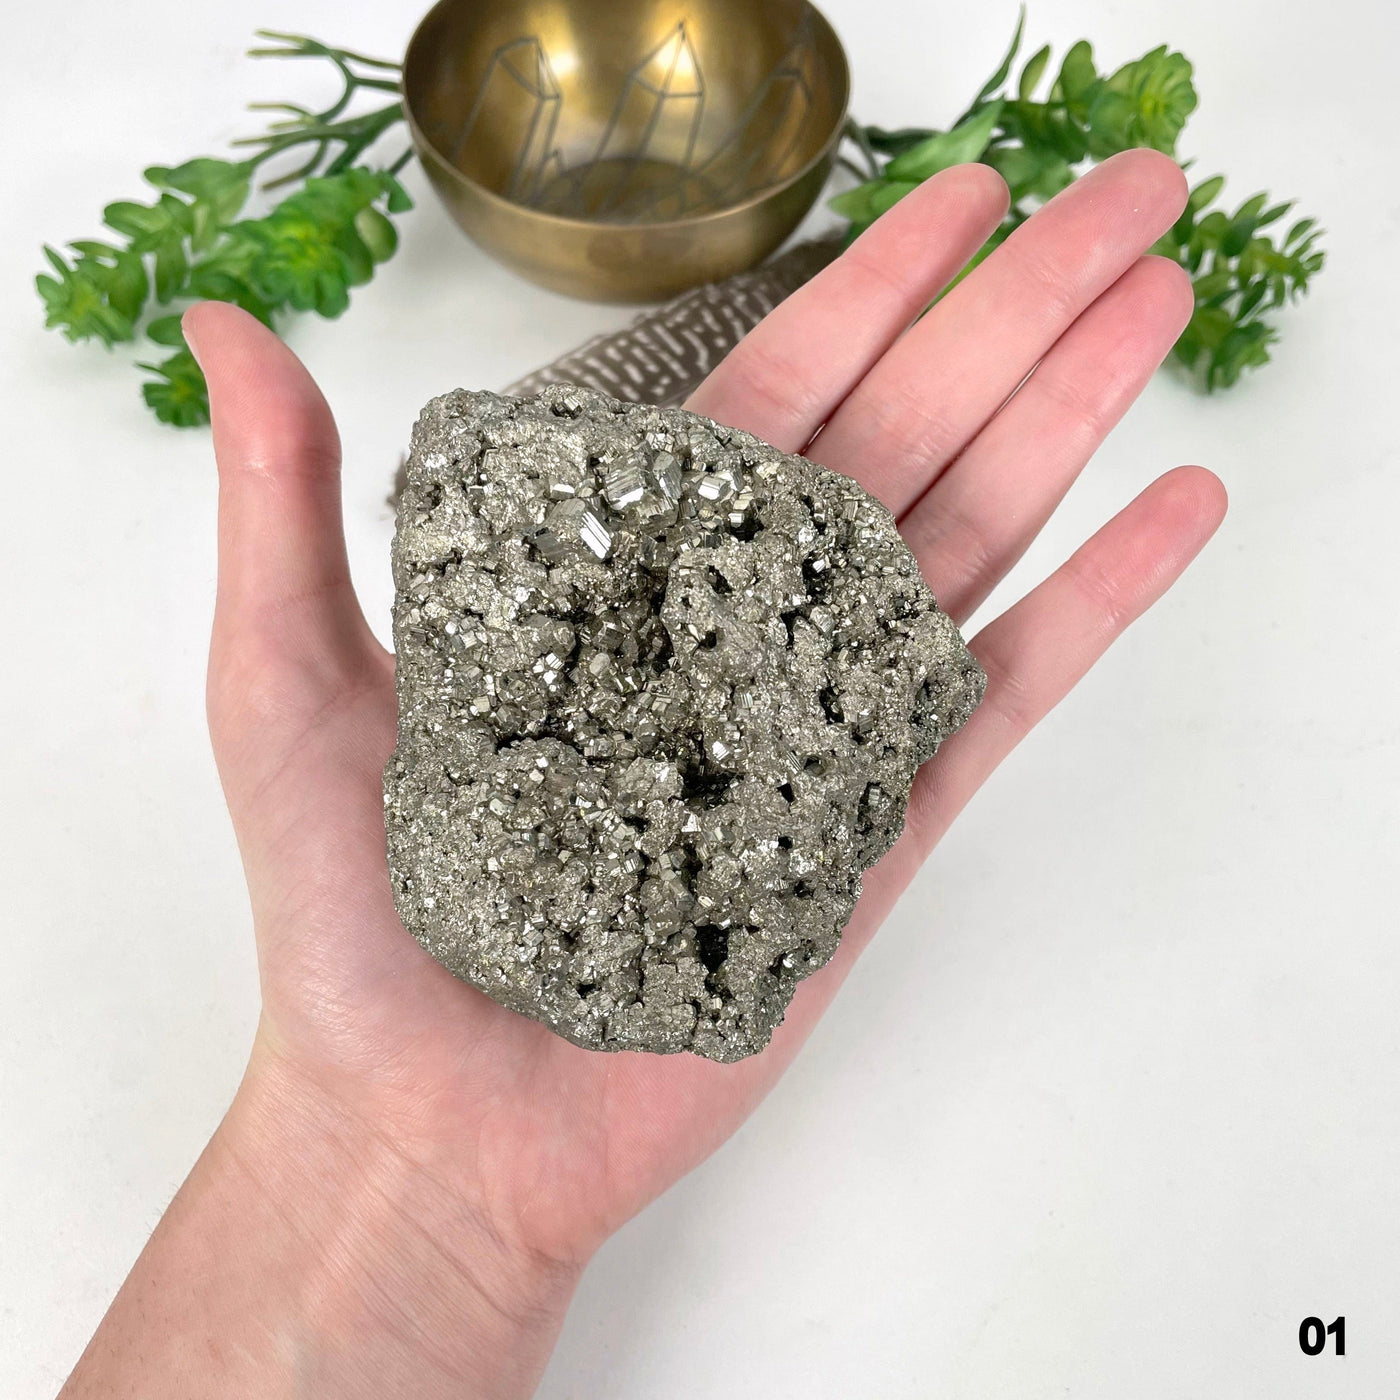 rough pyrite stone option 01 in hand for size reference